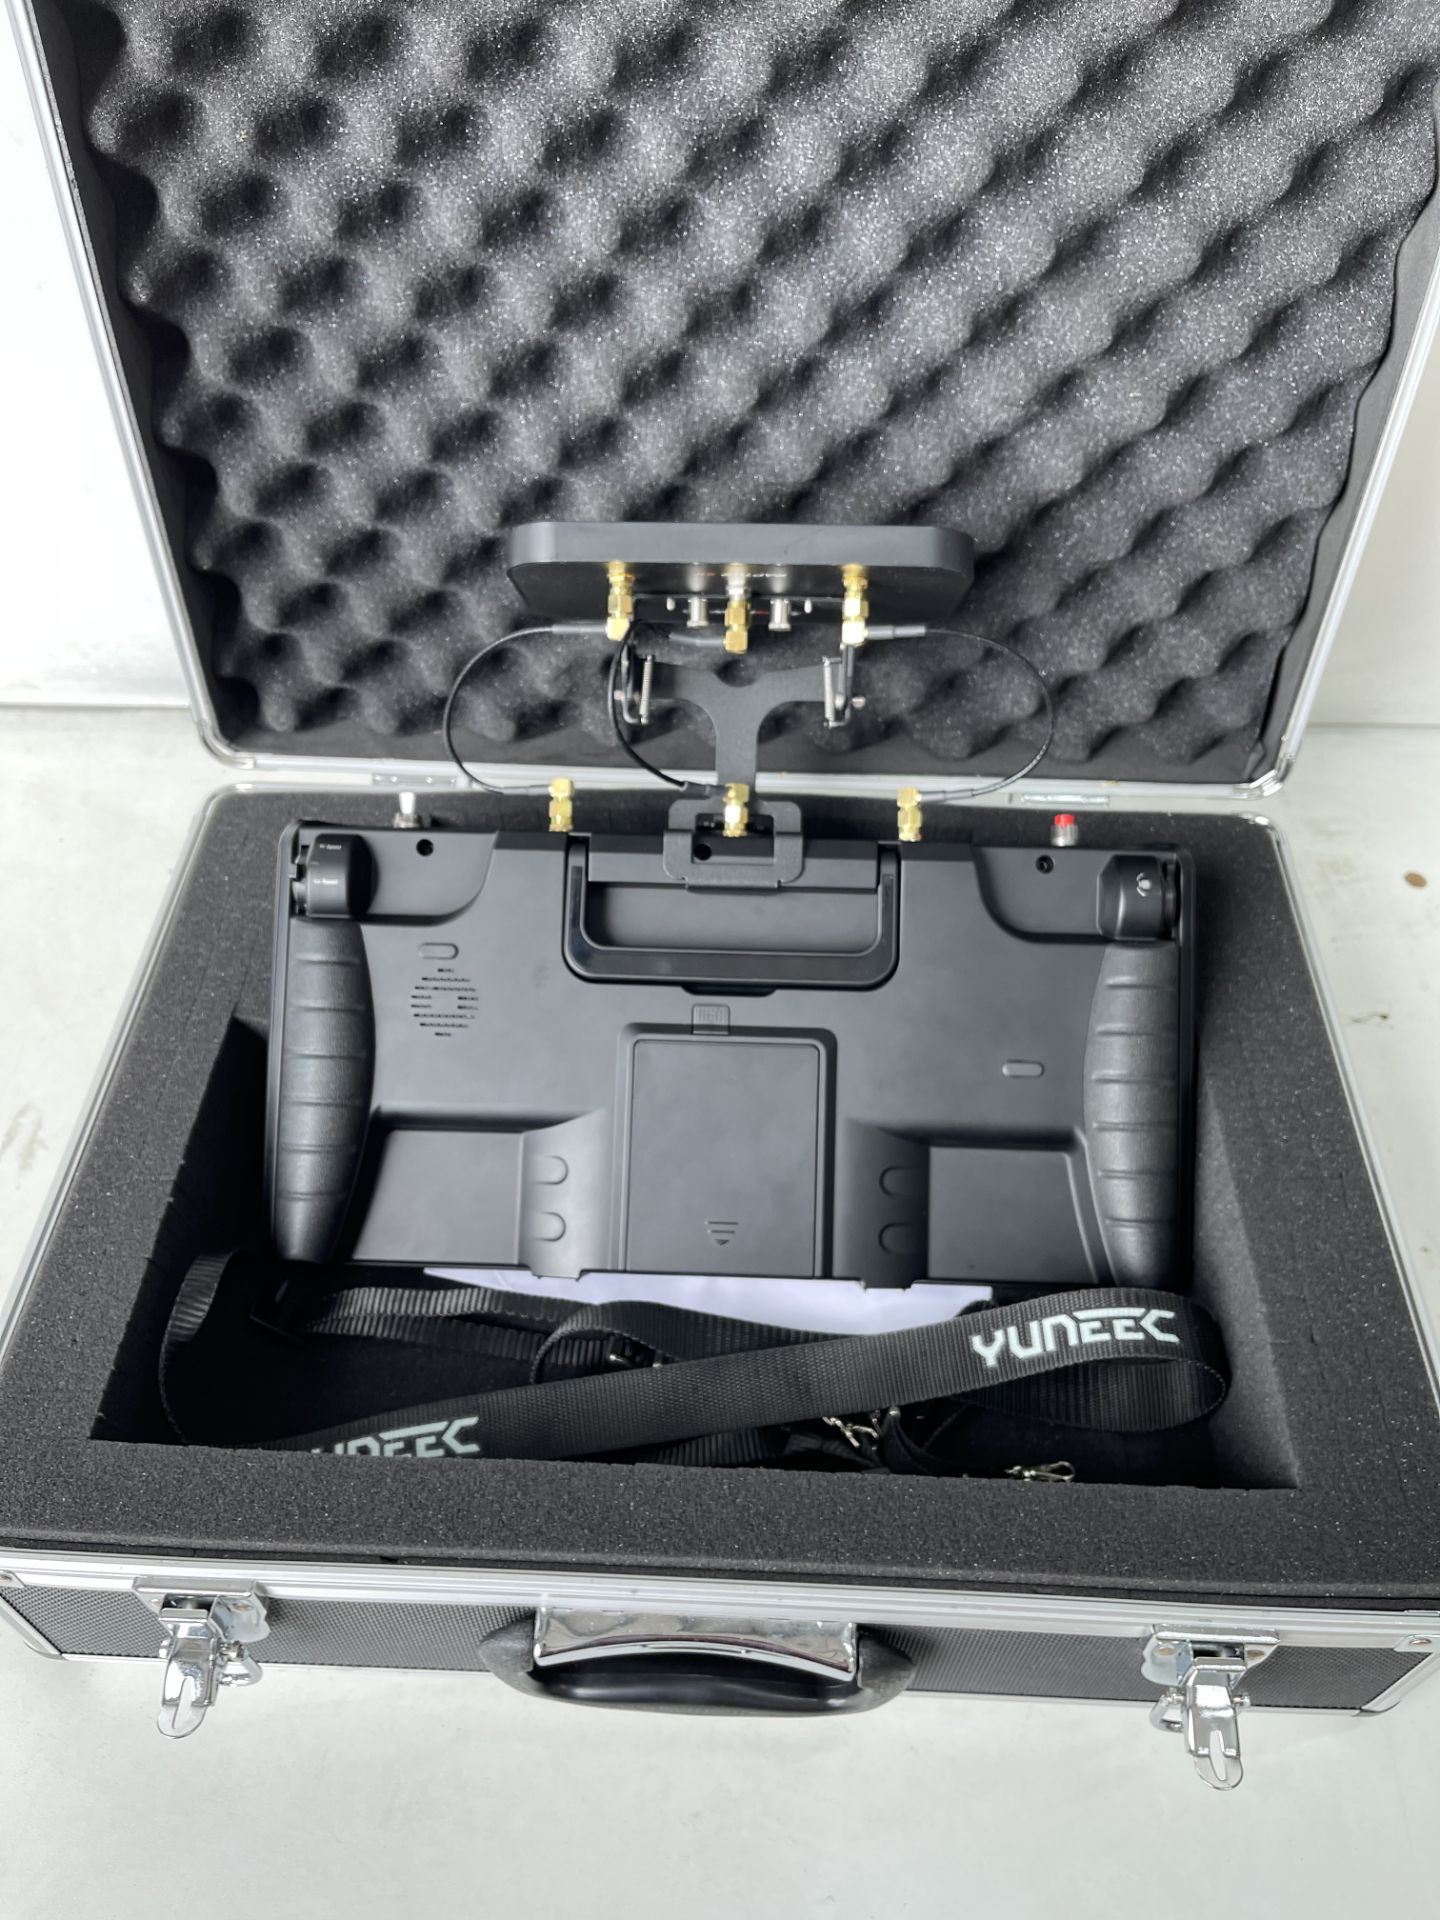 Yuneec H520 drone YOM 2019 and accessories as listed - Image 19 of 39